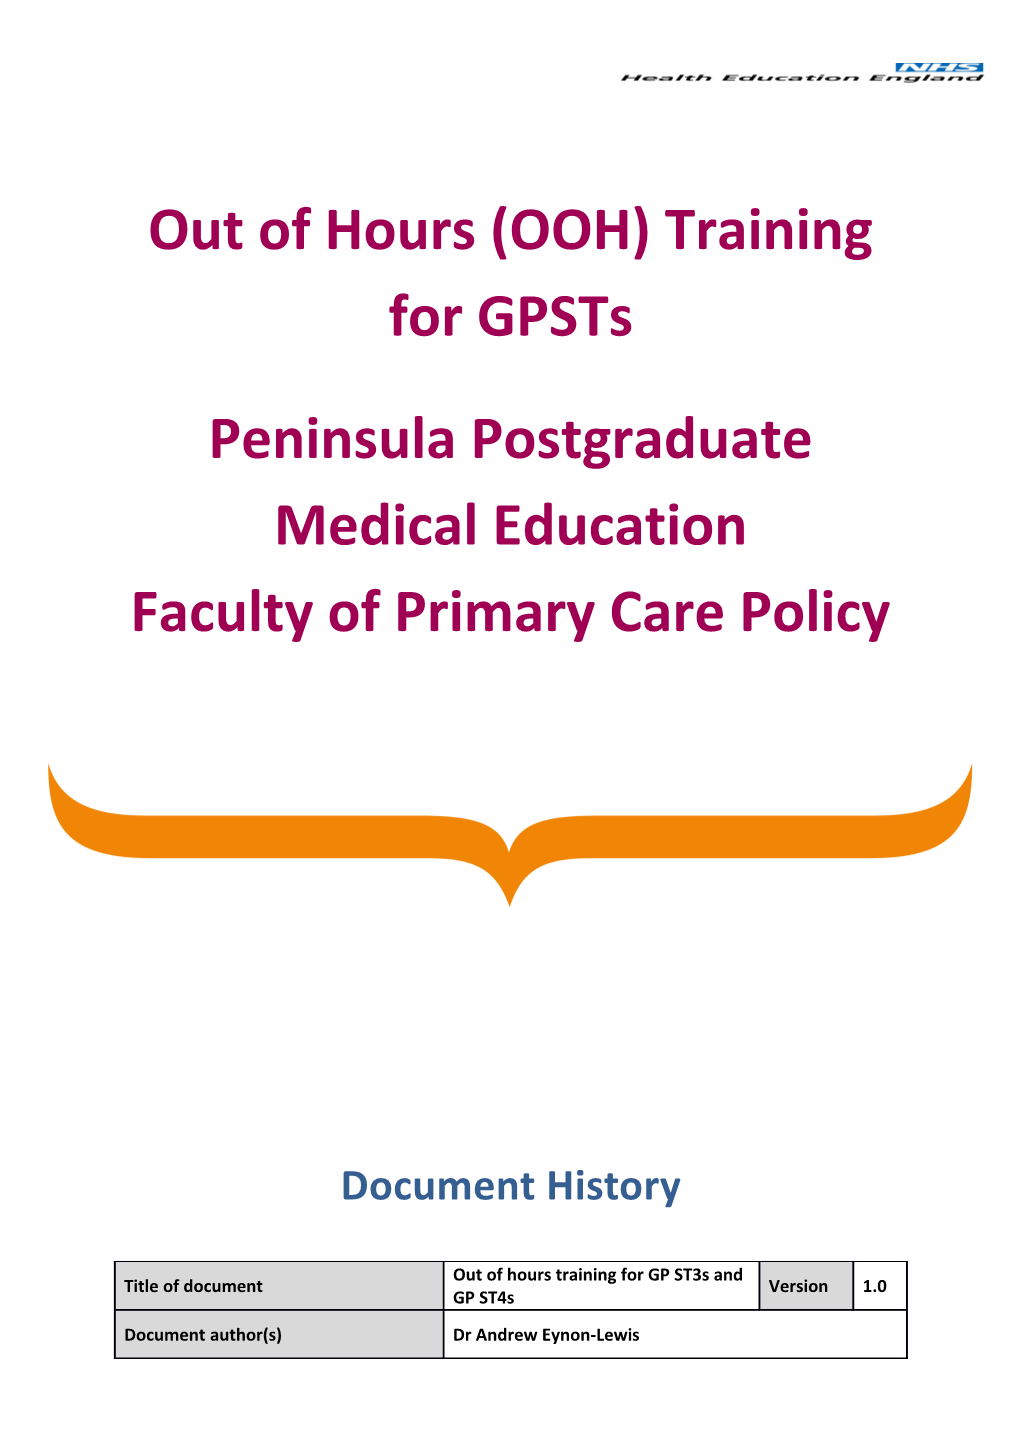 Out of Hours (OOH) Training for Gpsts